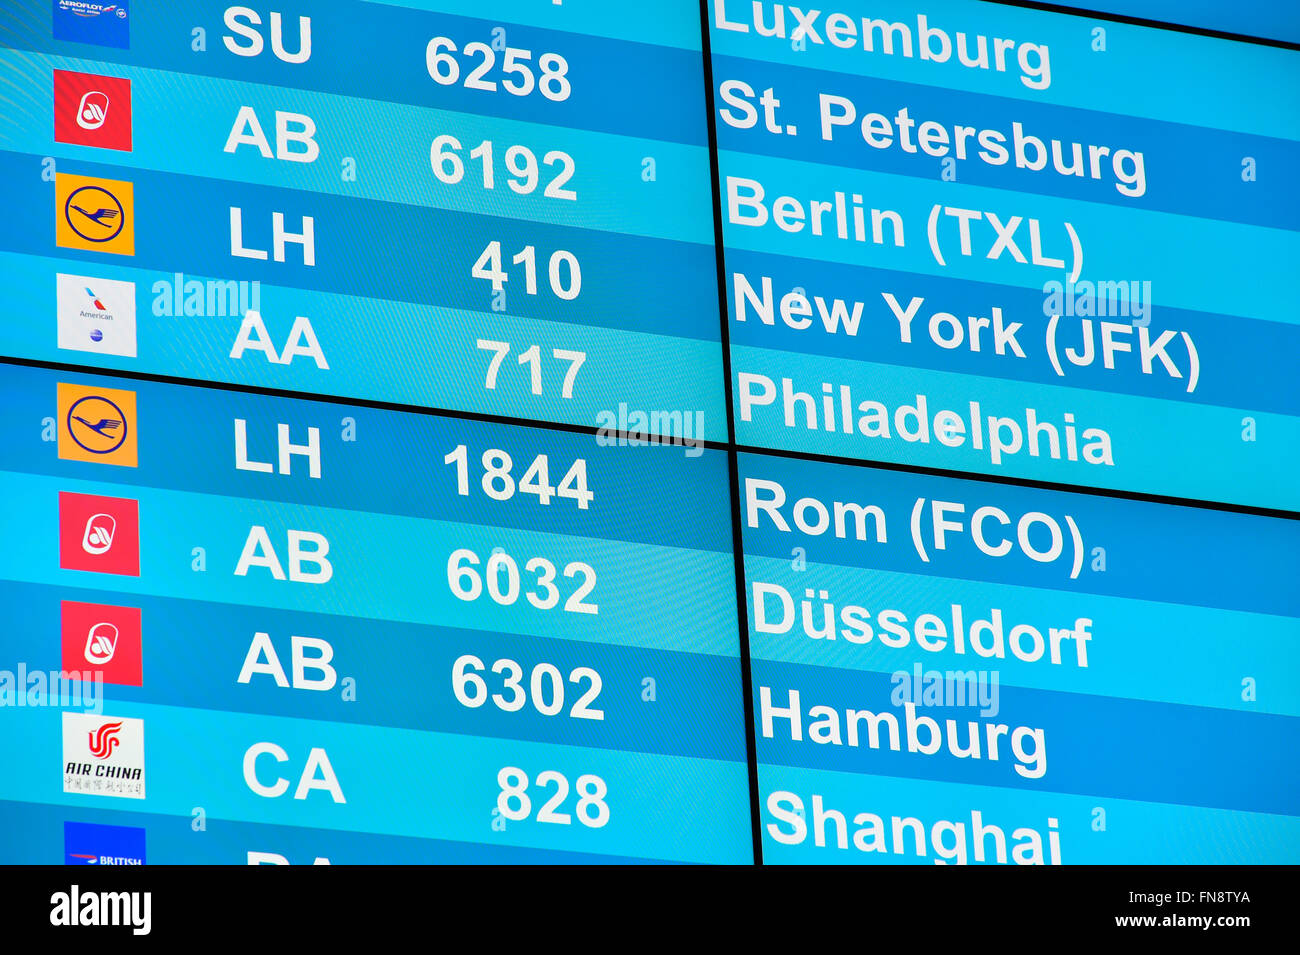 Display, Monitor, Scorebord, show, Flights, Flightnumber, Time, Shedule, Arrival, Departure, Airline, Airlinecode, Sign, No, Stock Photo